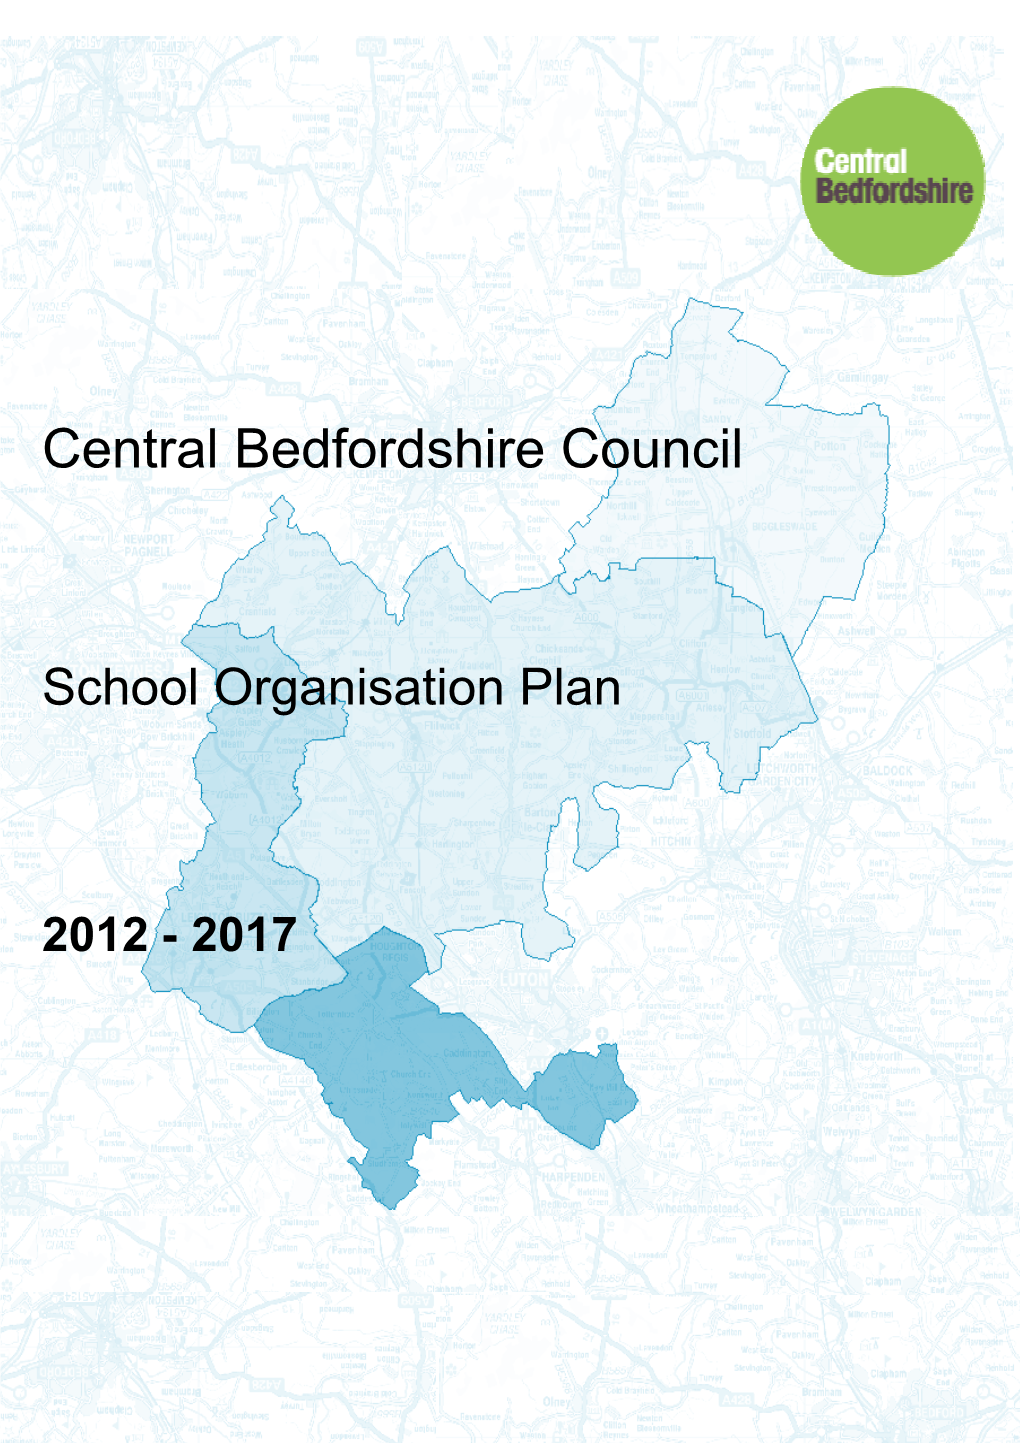 Central Bedfordshire Council’S Council Second School Organisation Plan (SOP) and Covers the Period 2012 to 2017